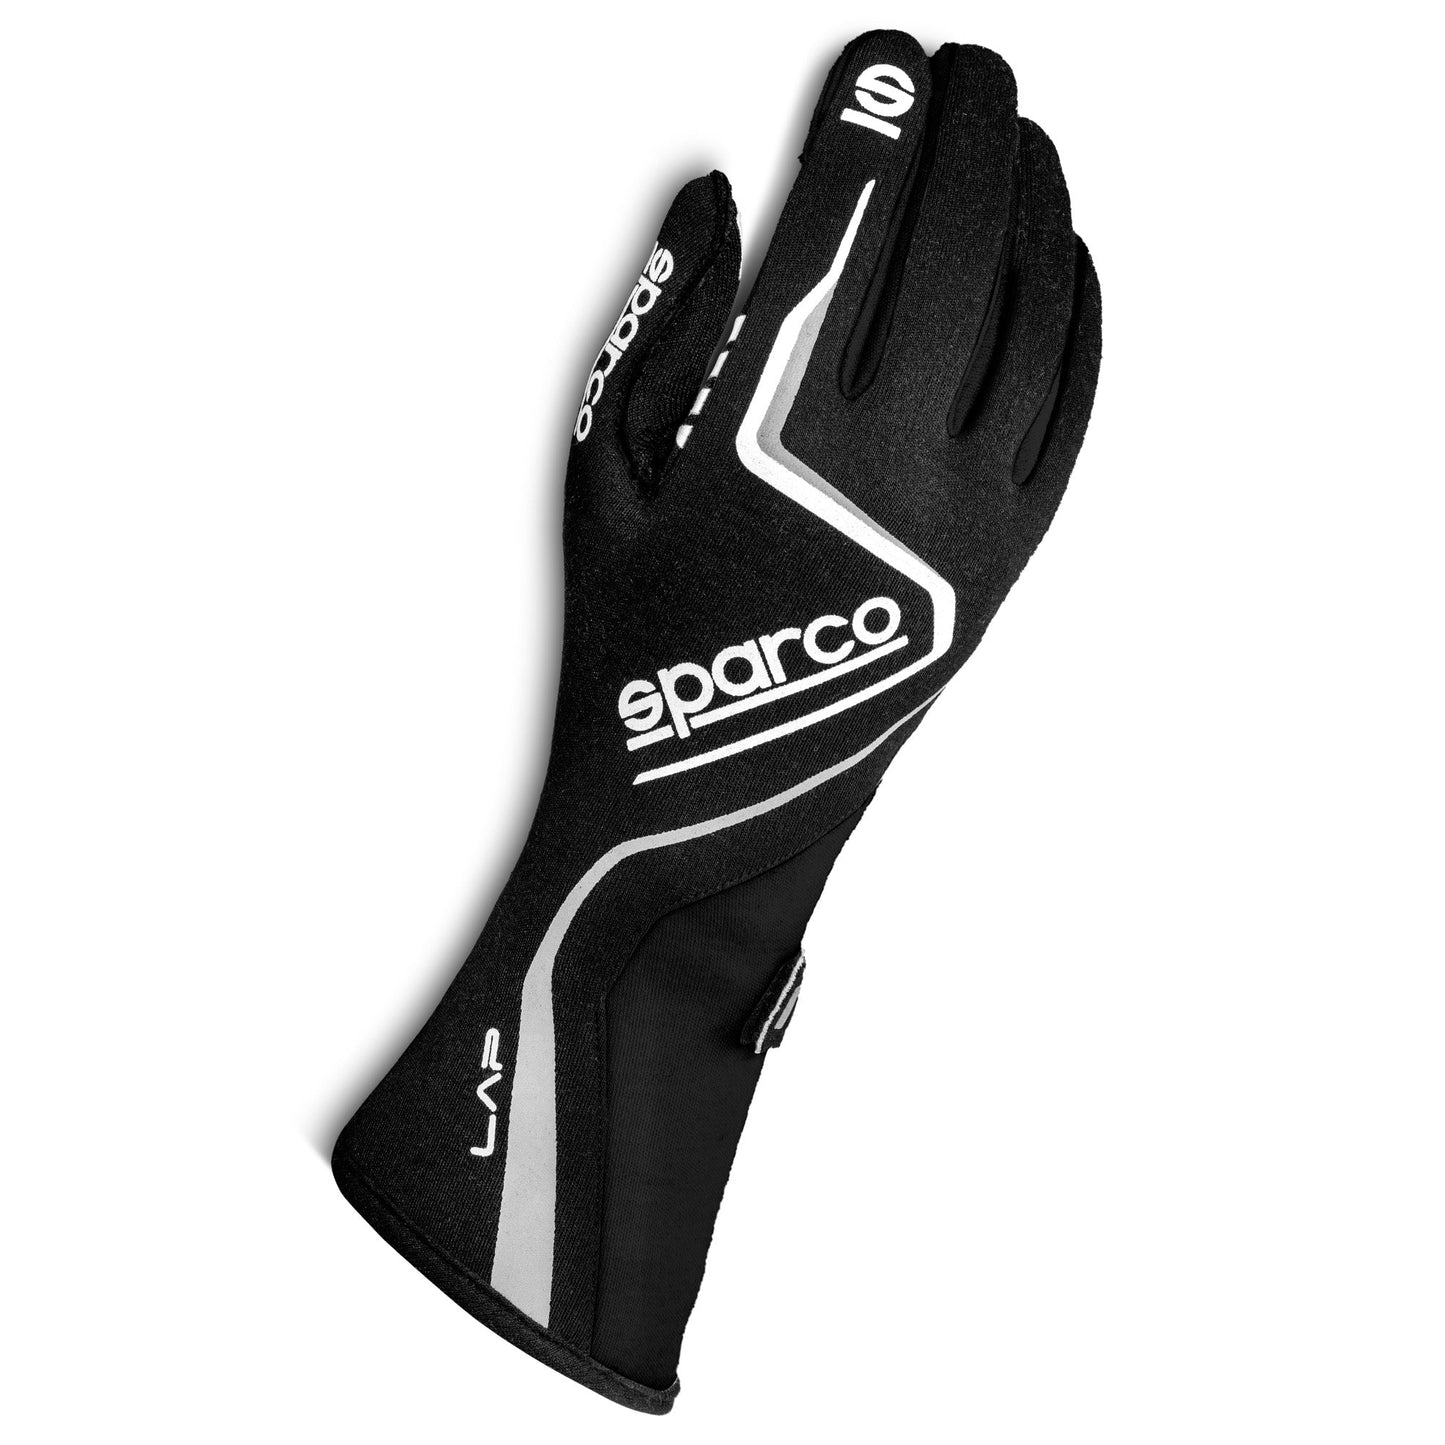 Sparco Lap Racing Gloves - 2021 Model